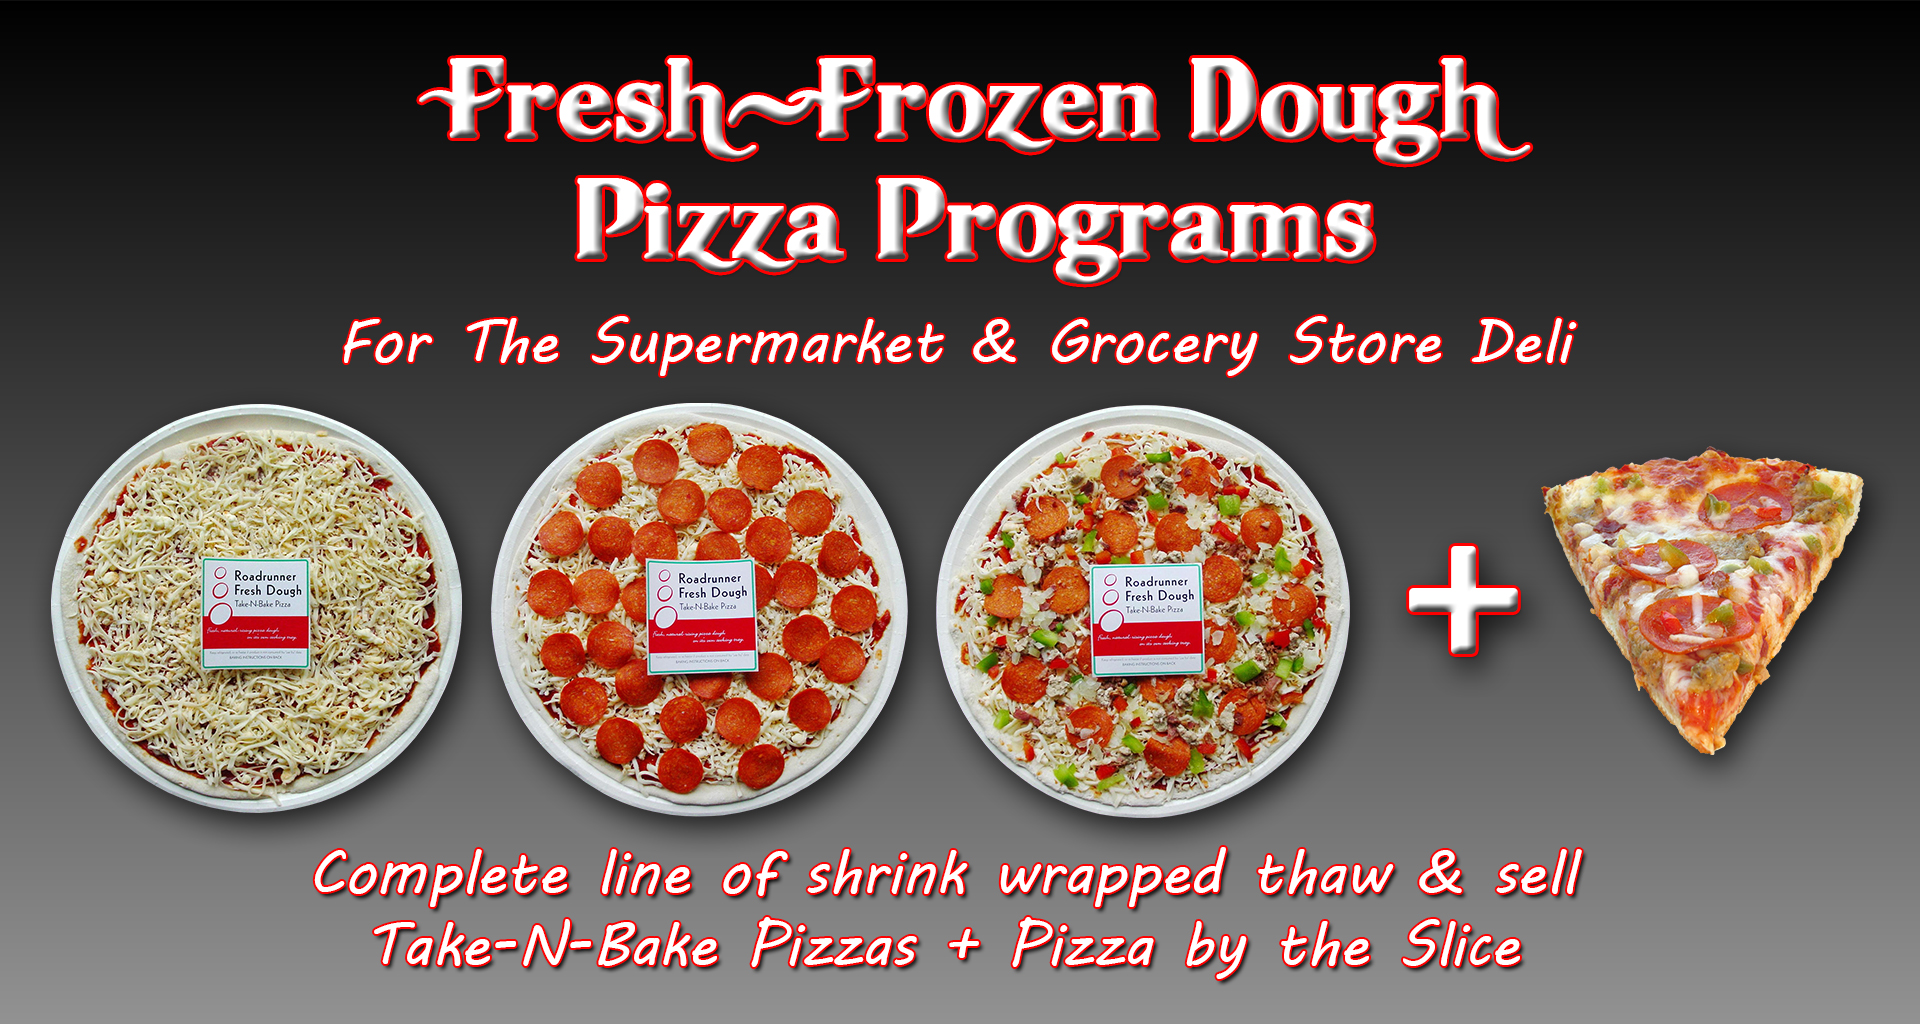 Fresh-Frozen Dough Pizza Programs for the supermarket and grocery store deli